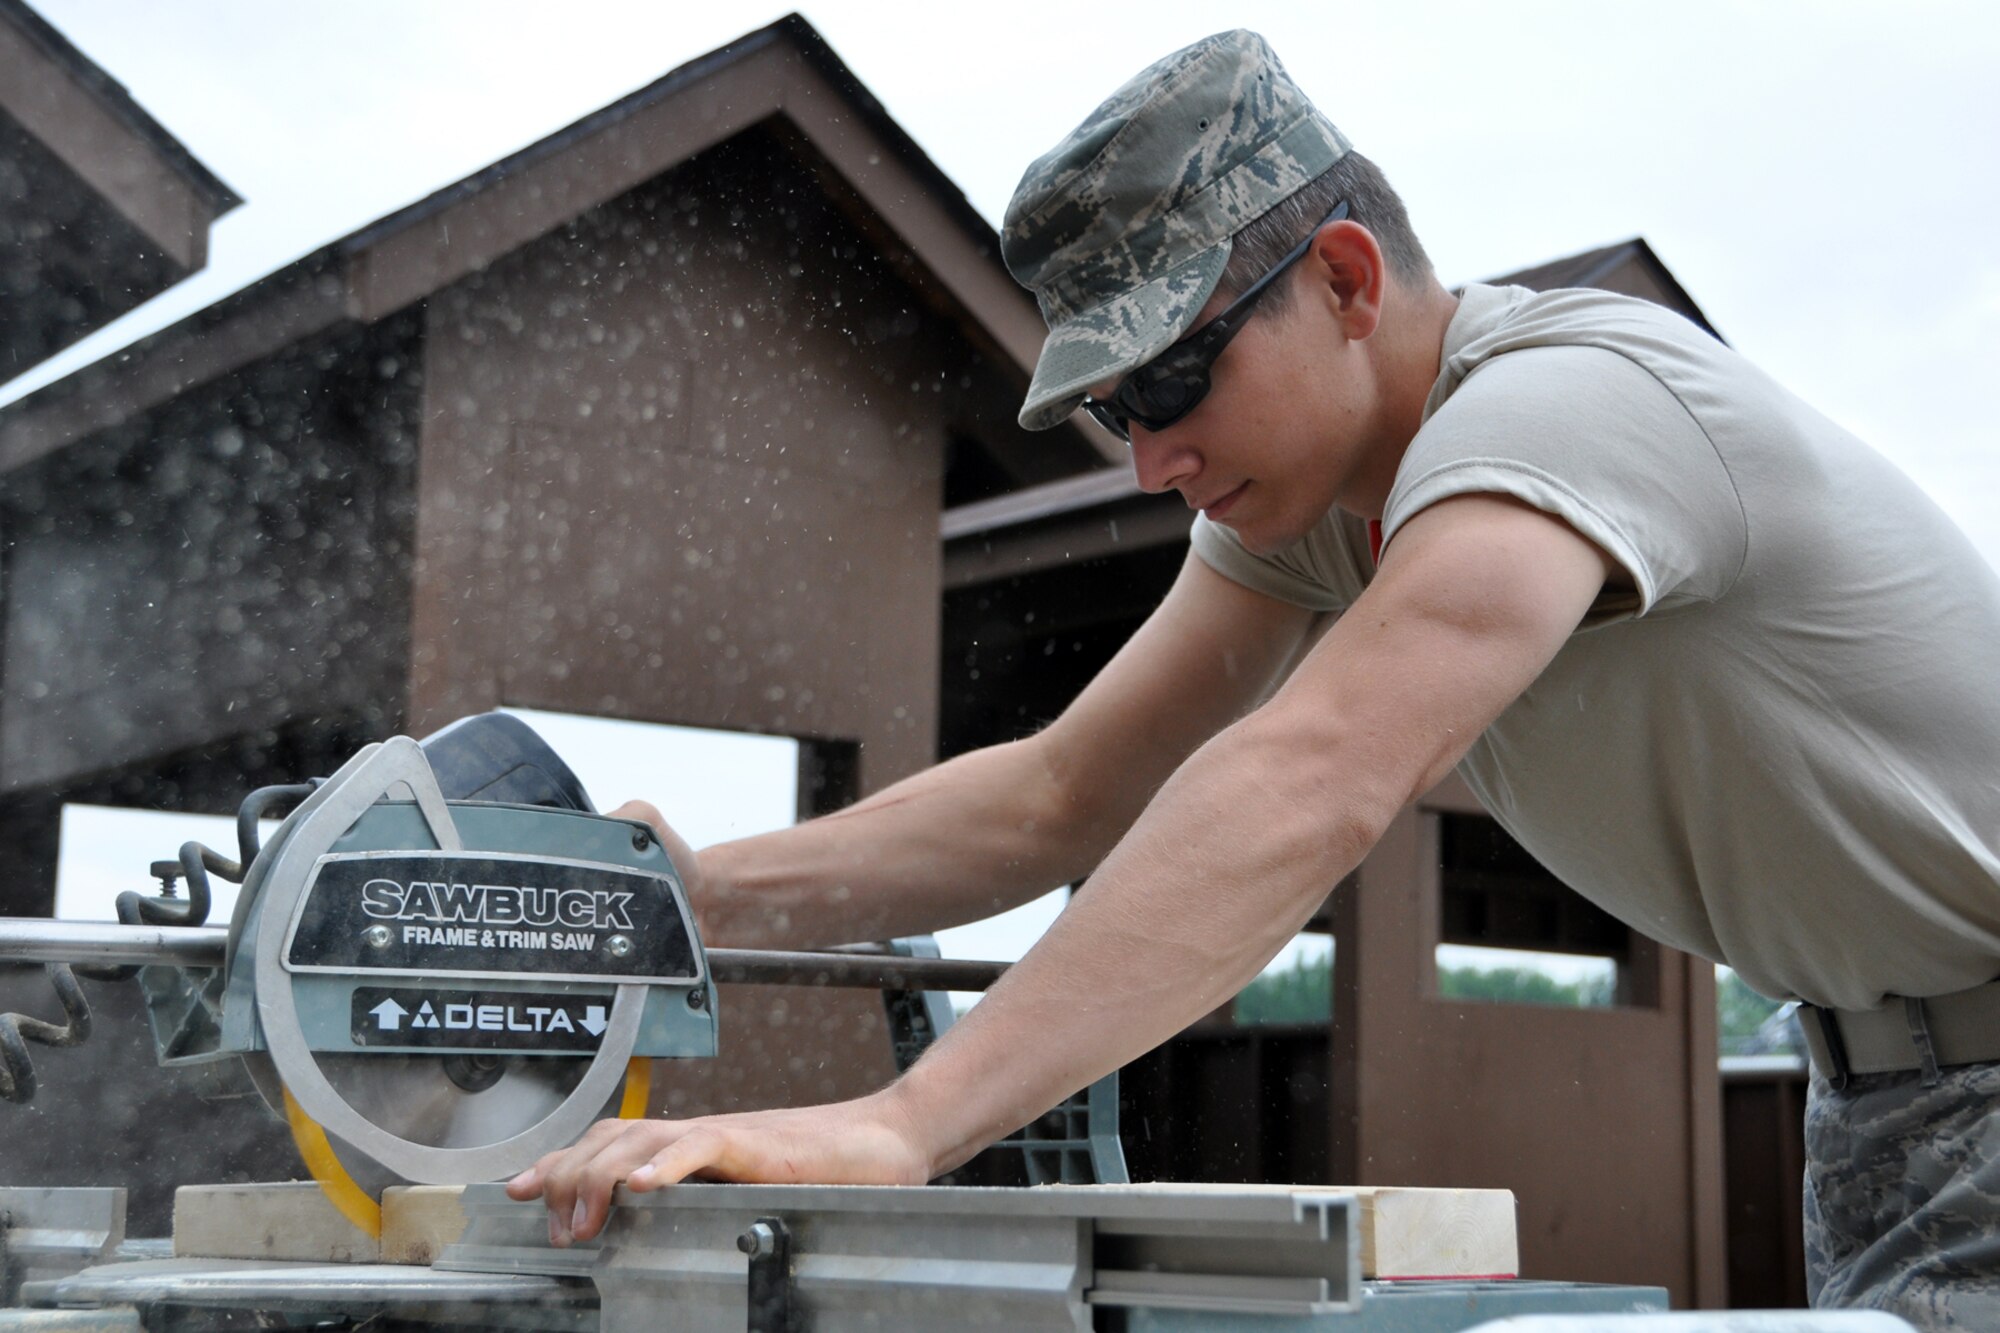 Senior Airman Trevor Reed, a heavy equipment operator assigned to the 307th Civil Engineer Squadron, cuts 2x4s during the construction of a Prime Base Engineer Emergency Force (Prime BEEF) training area at Youngstown Air Reserve Station, Vienna, Ohio, Aug. 14, 2012. Reed was part of a 29-person detail from Barksdale that spent two weeks at Youngstown ARS assisting 910th Civil Engineer Squadron personnel build the training area. (U.S. Air Force photo by Master Sgt. Jeff Walston)